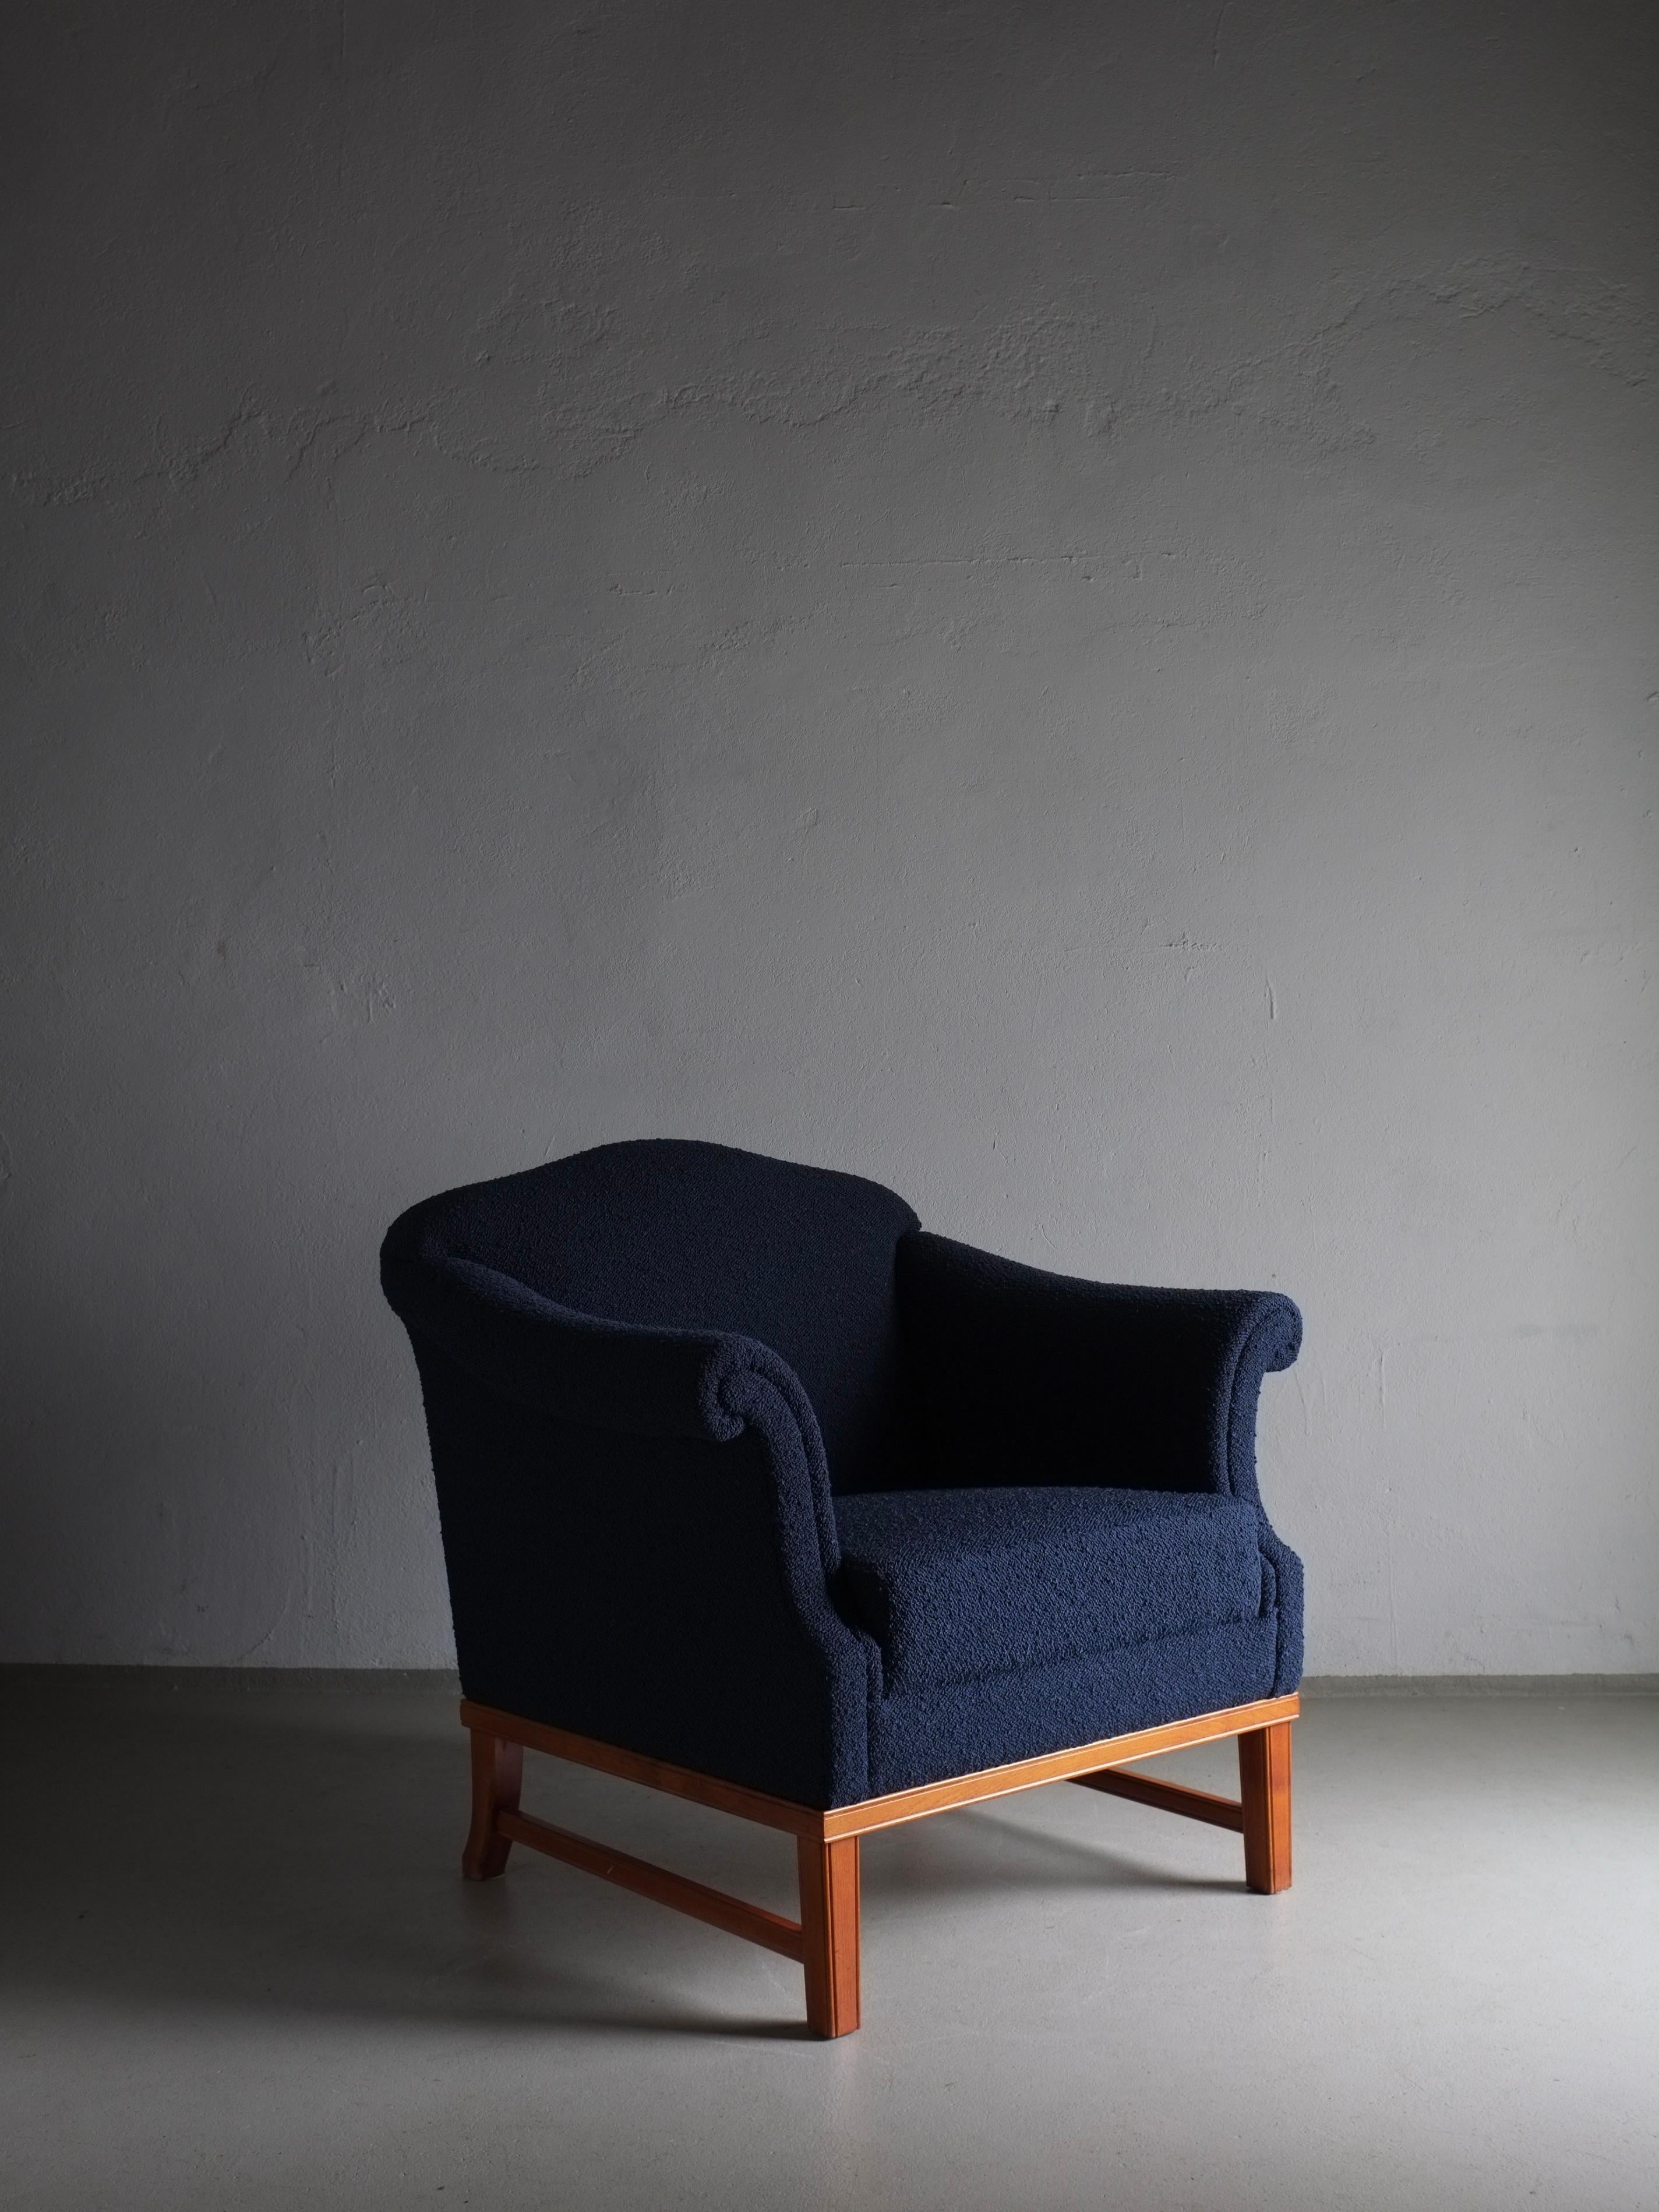 Deep navy lounge chair with a carved back detail and wooden frame, newly upholstered with Dedar boucle fabric. I have two chairs in navy and one in pearl gray.

Additional information:
Country of manufacture: Sweden
Period: 1940s
Dimensions: W 83 cm